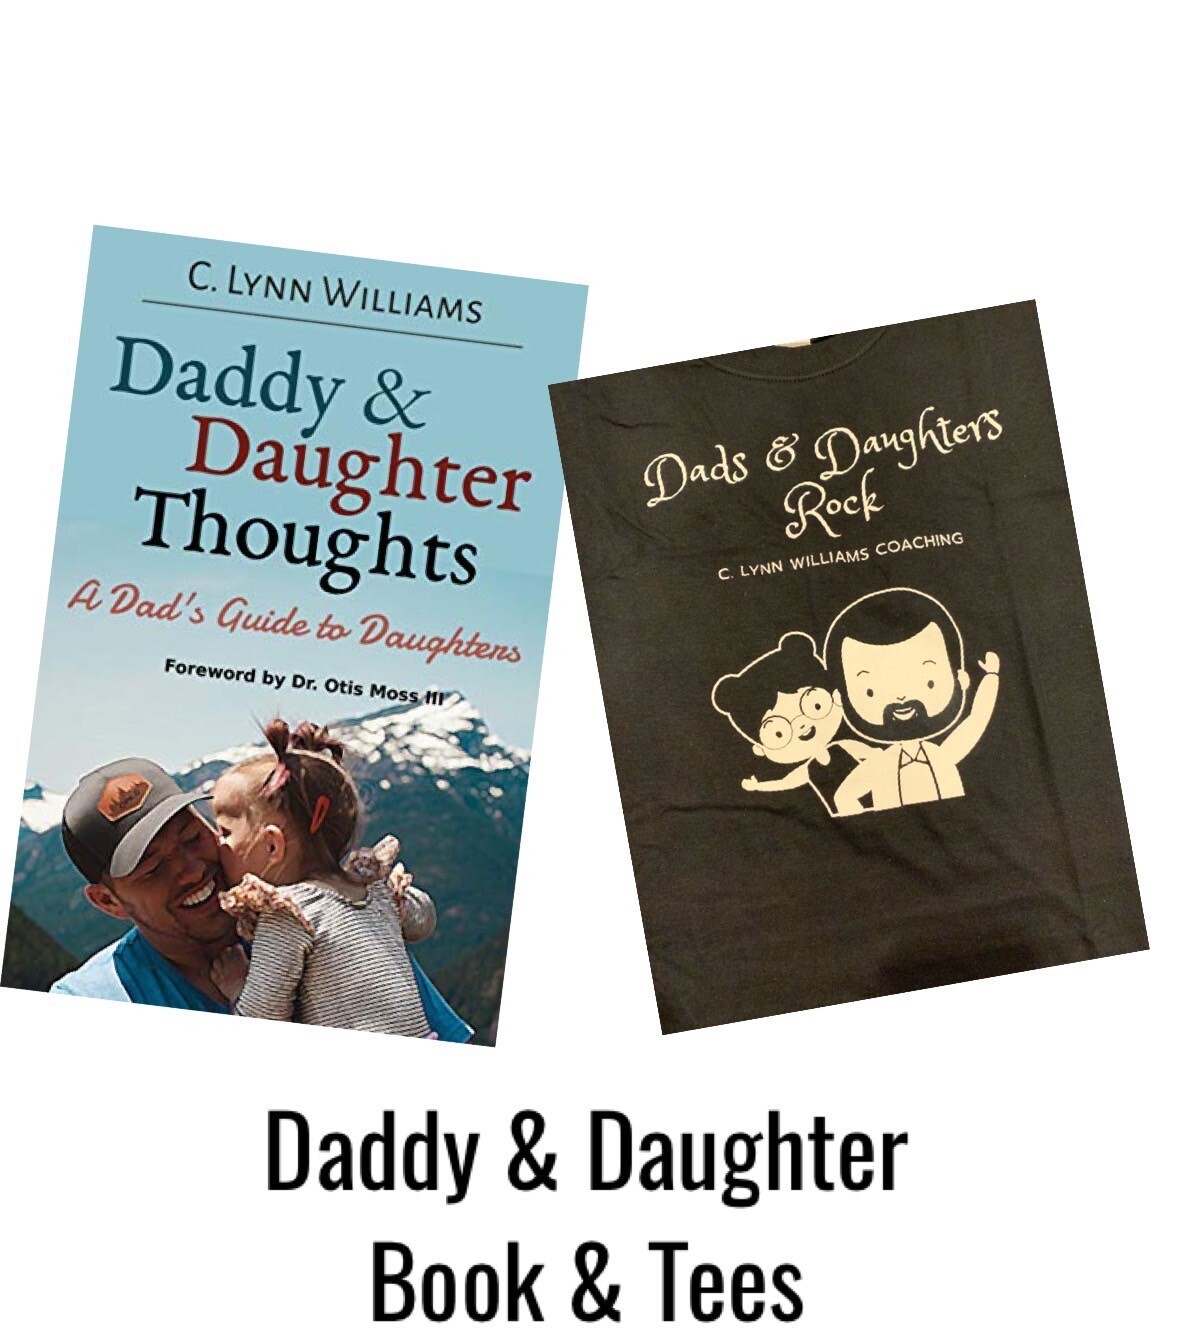 Daddy & Daughter Thoughts Summer Sale Deal!